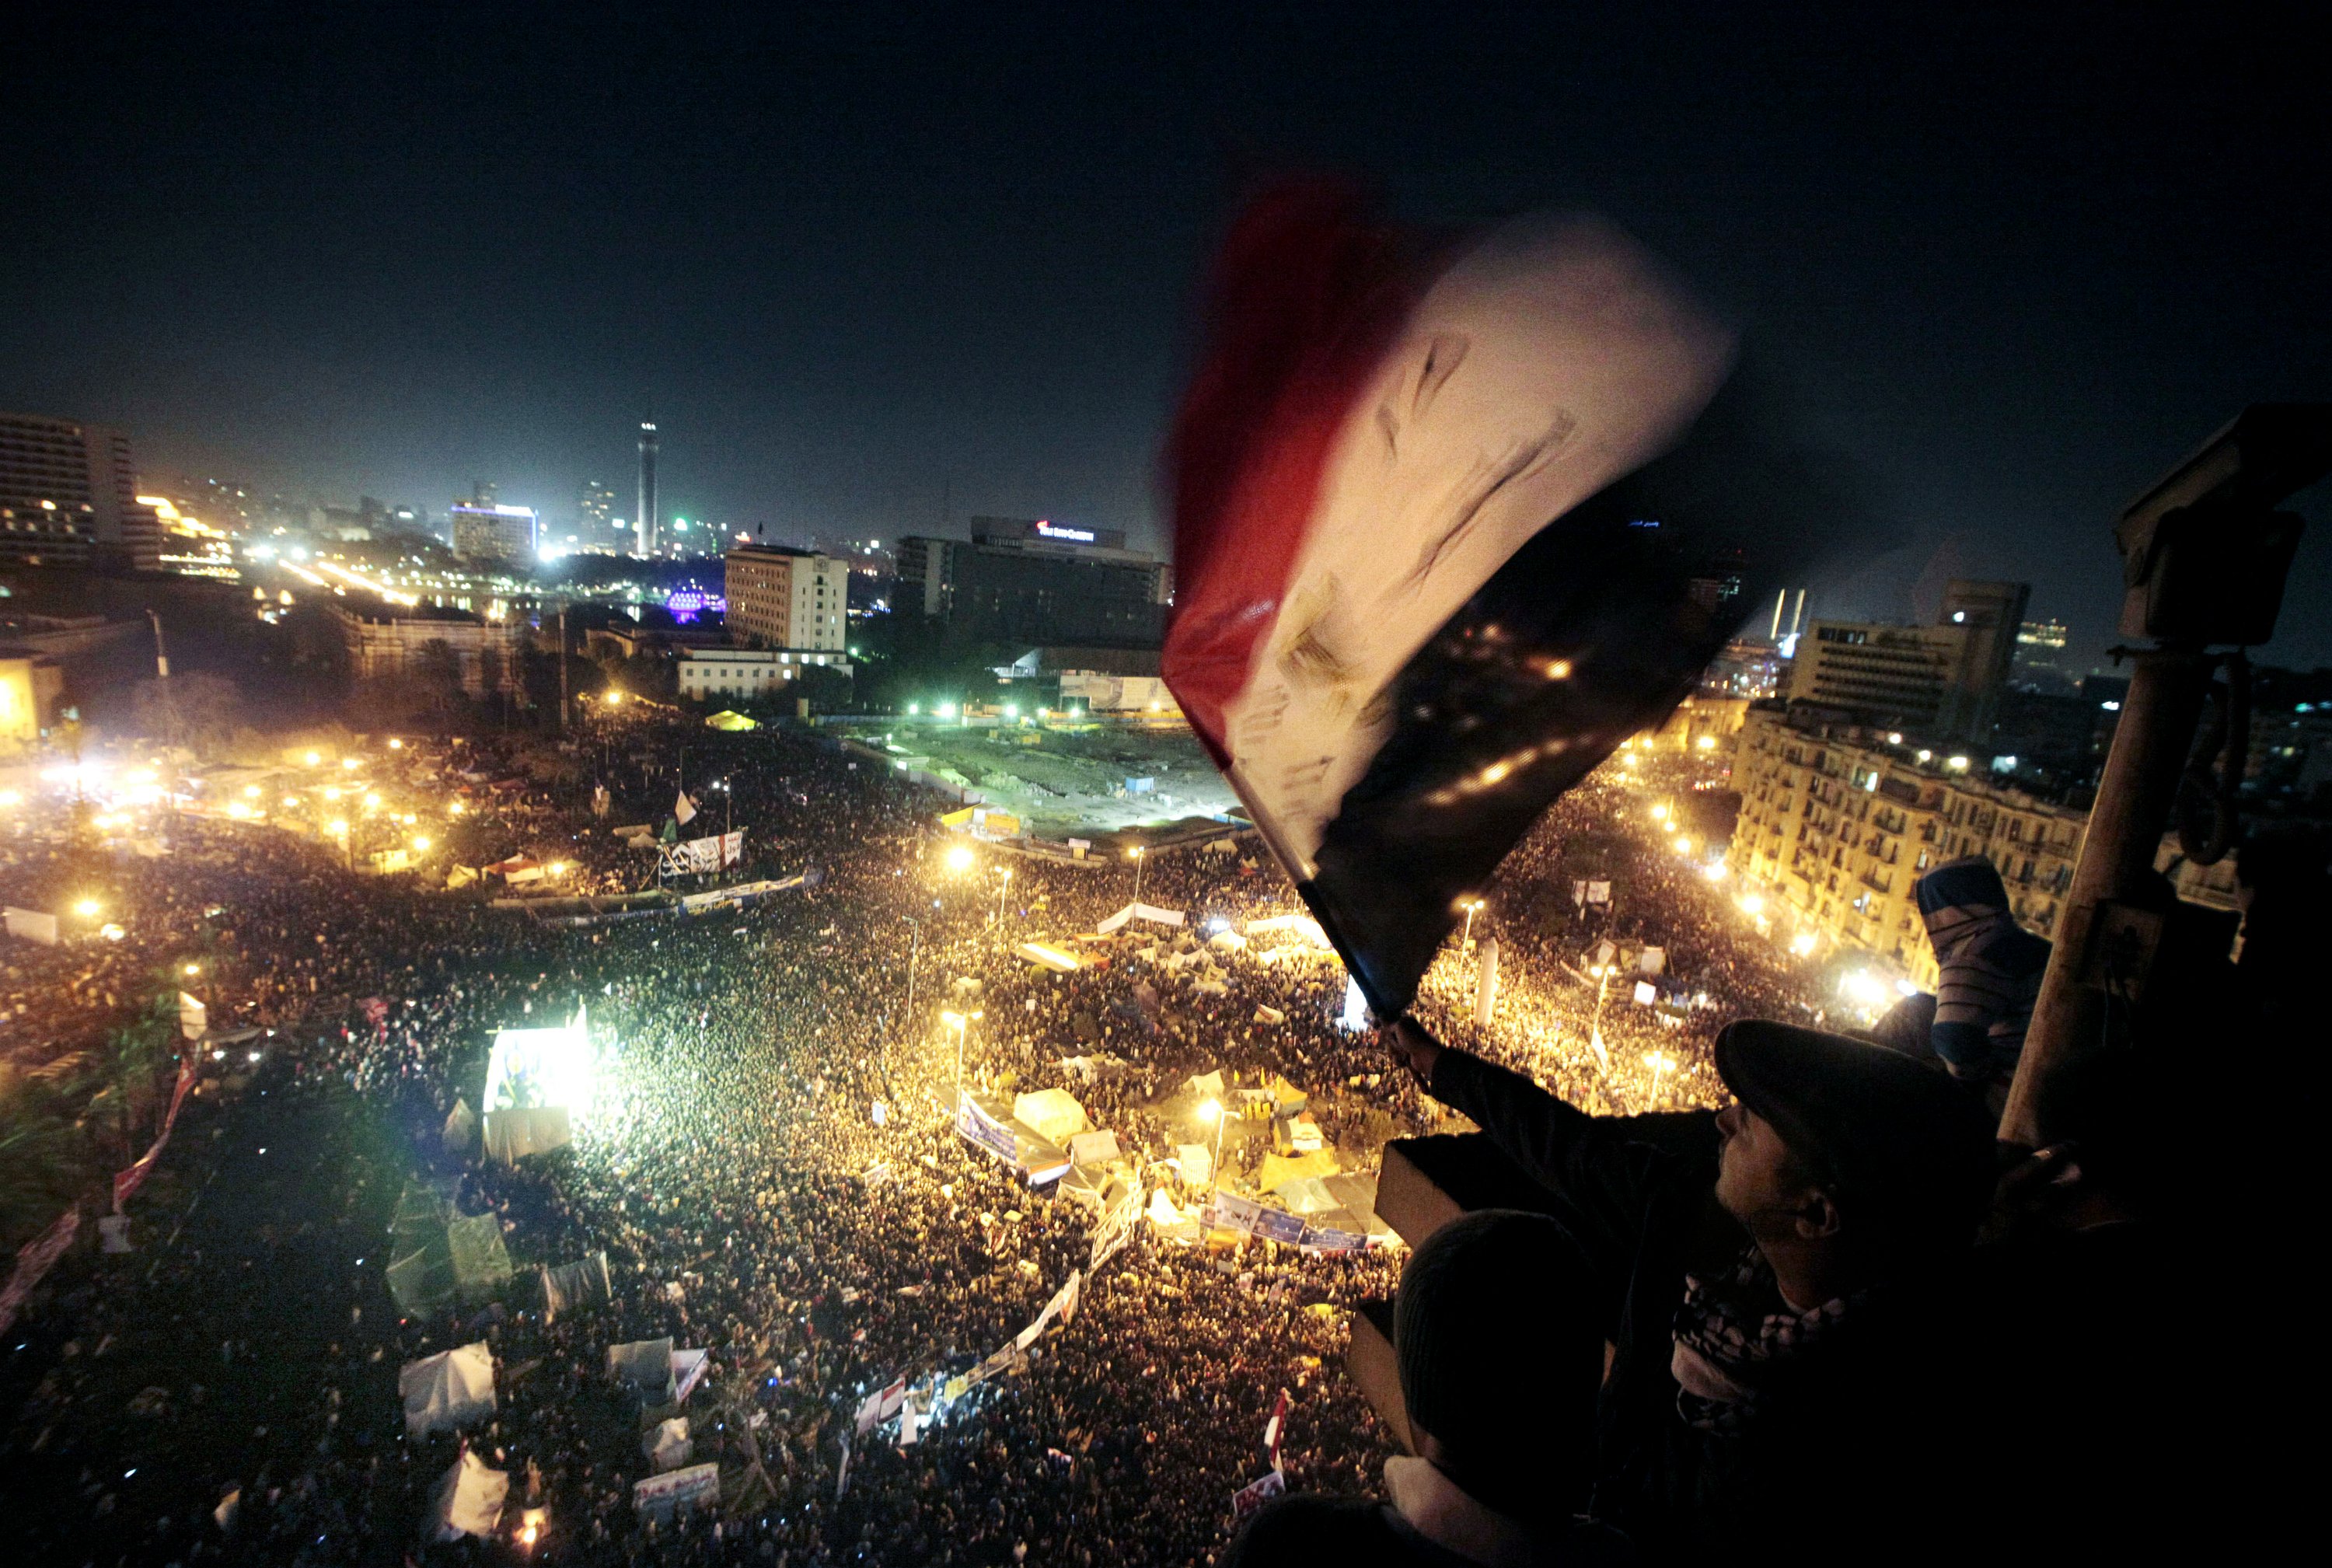 Exiles from the Arab Spring look back 10 years after the Egyptian uprising